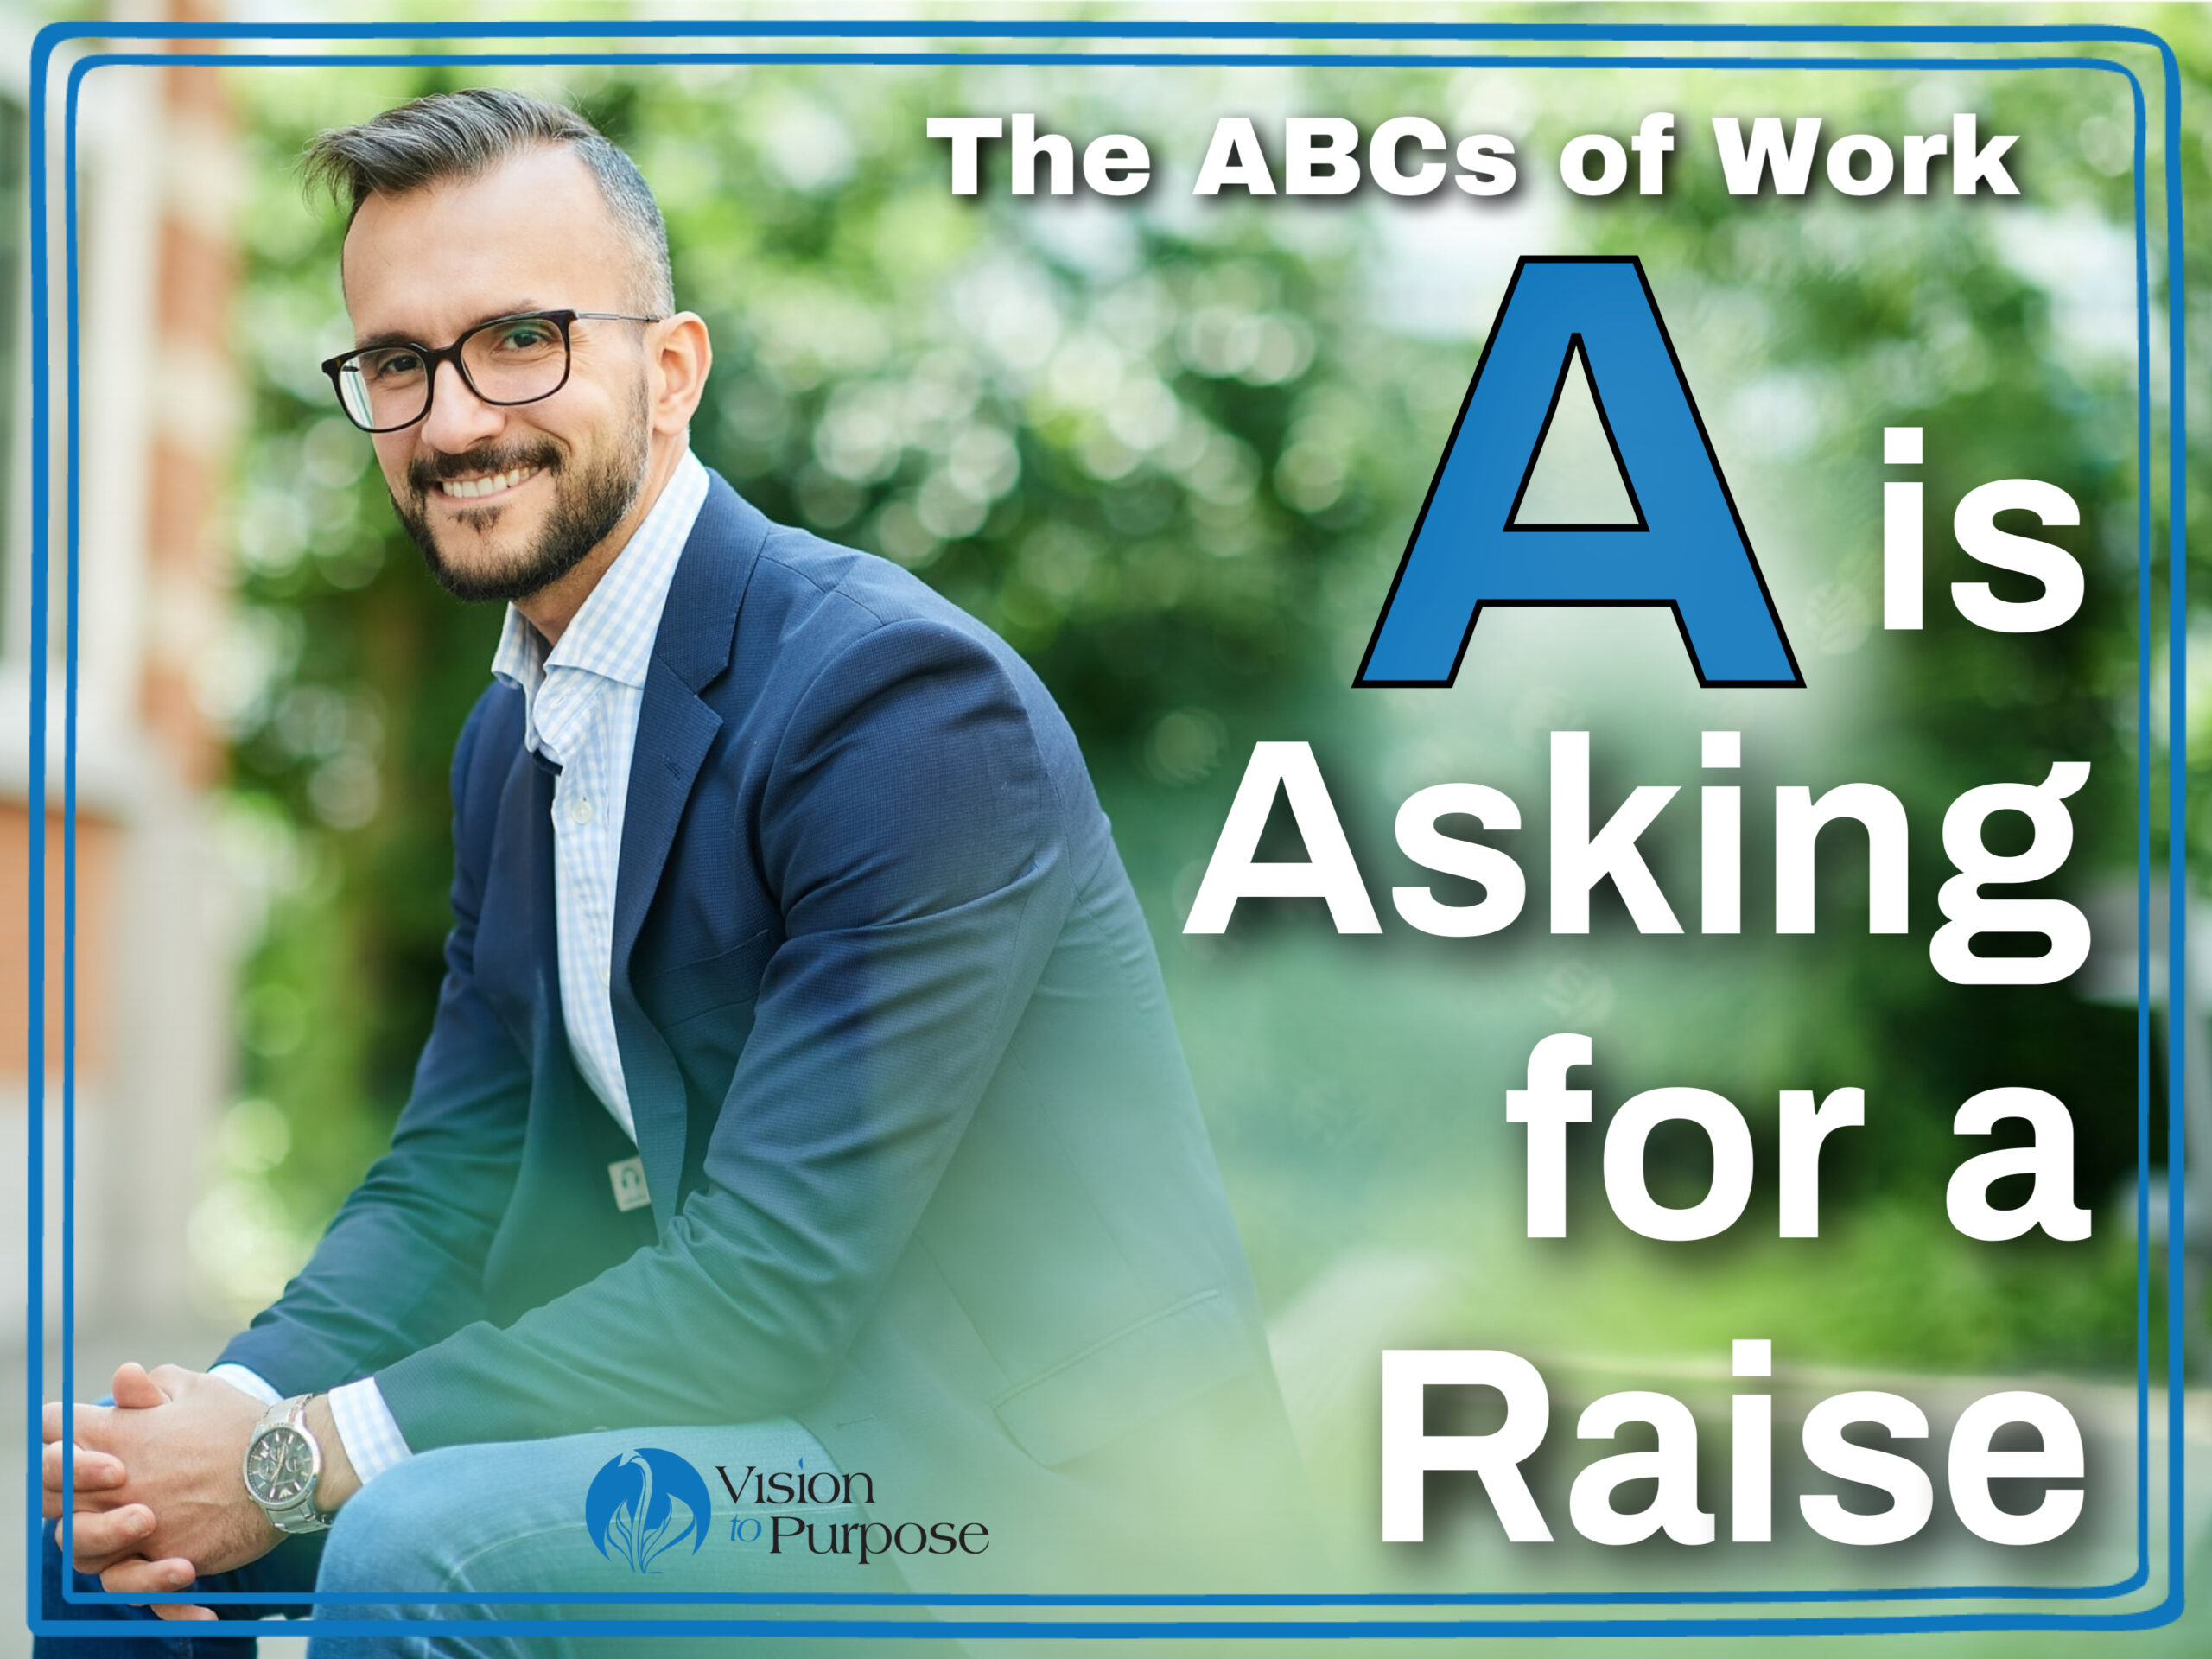 A is Asking for a Raise